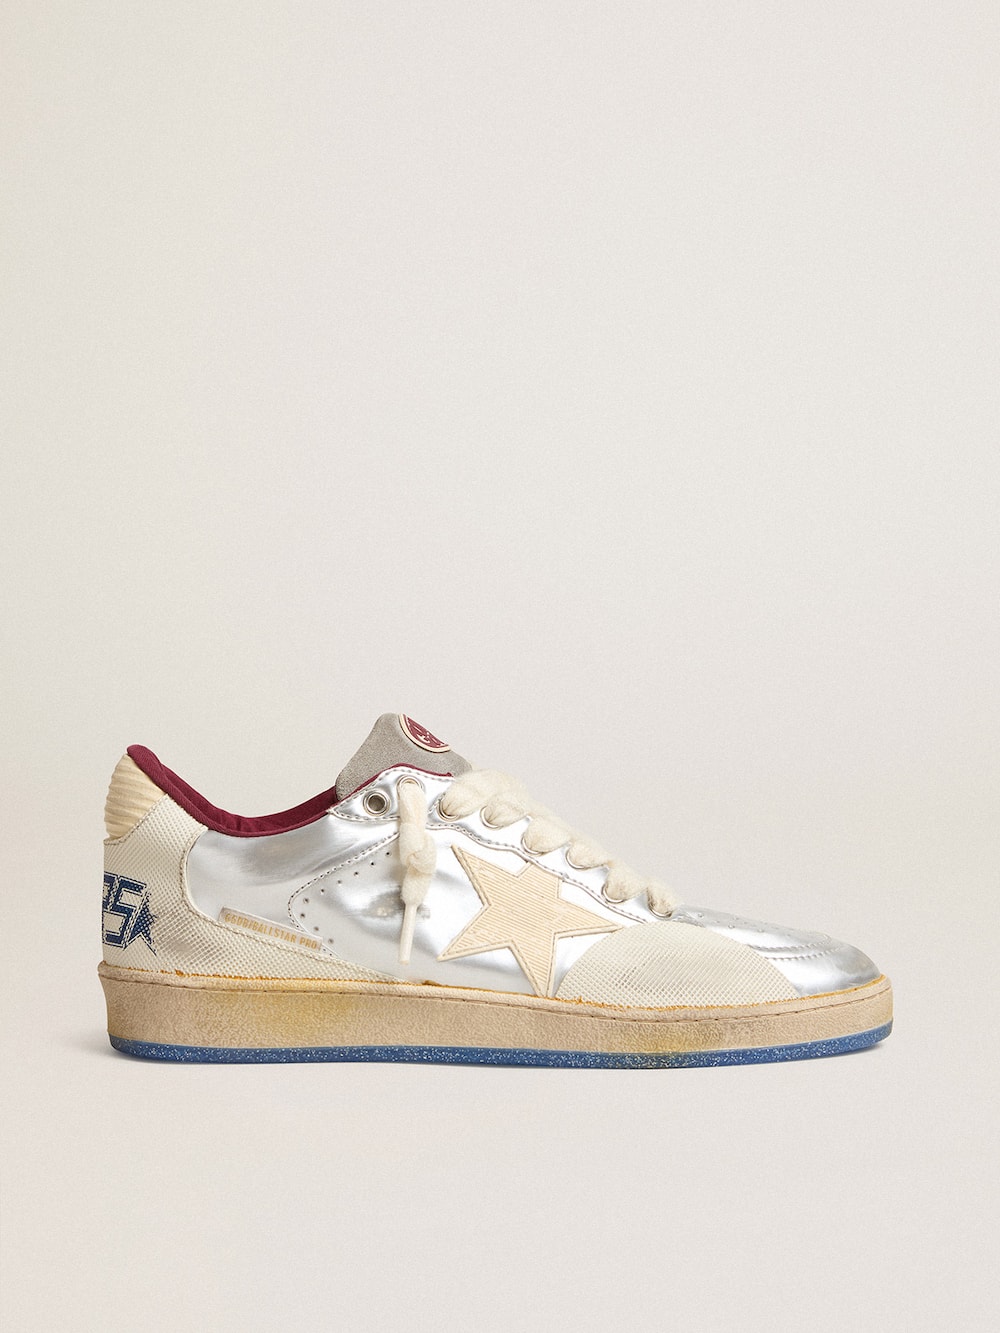 Golden Goose - Women’s Ball Star Pro in silver metallic leather with cream-colored star in 